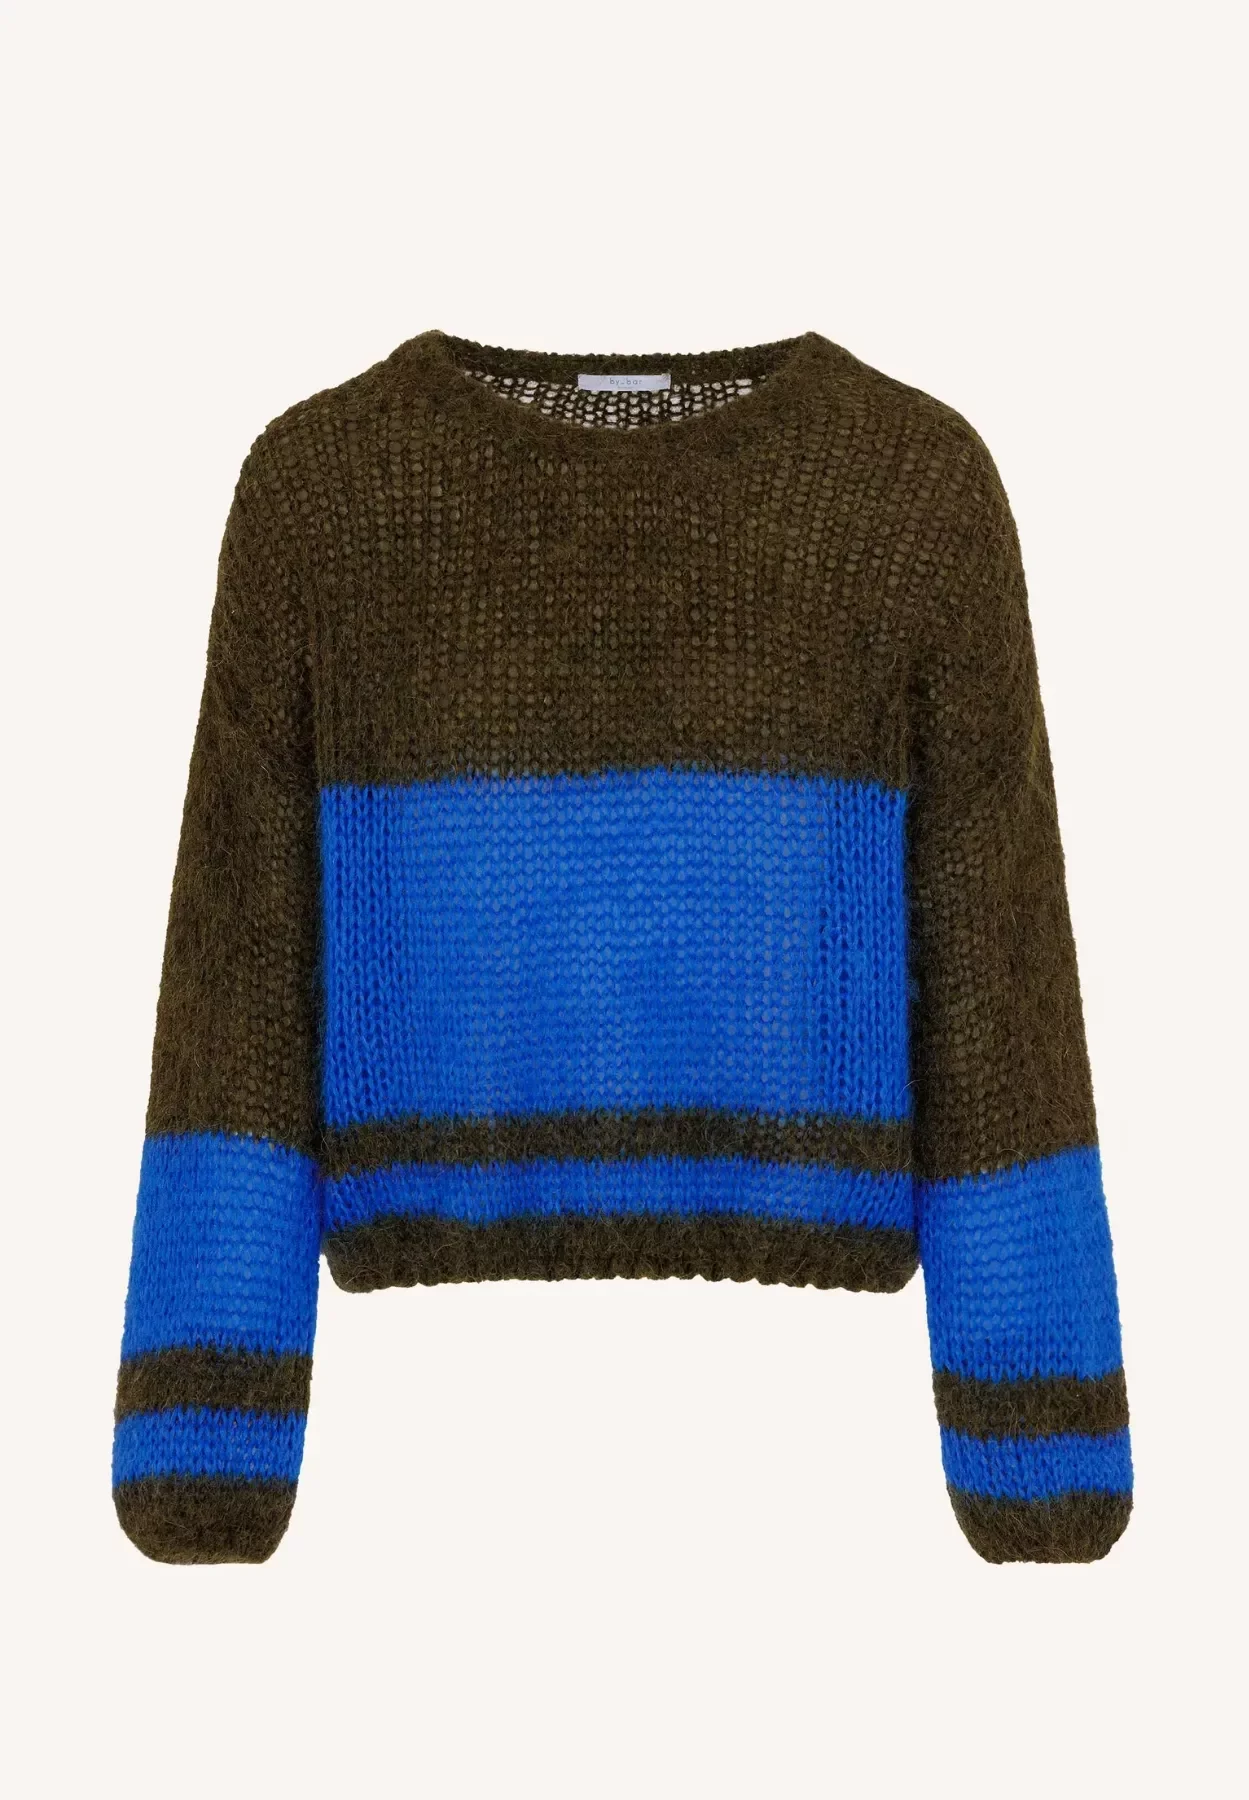 by-bar amsterdam - olli stripe pullover - olive 6